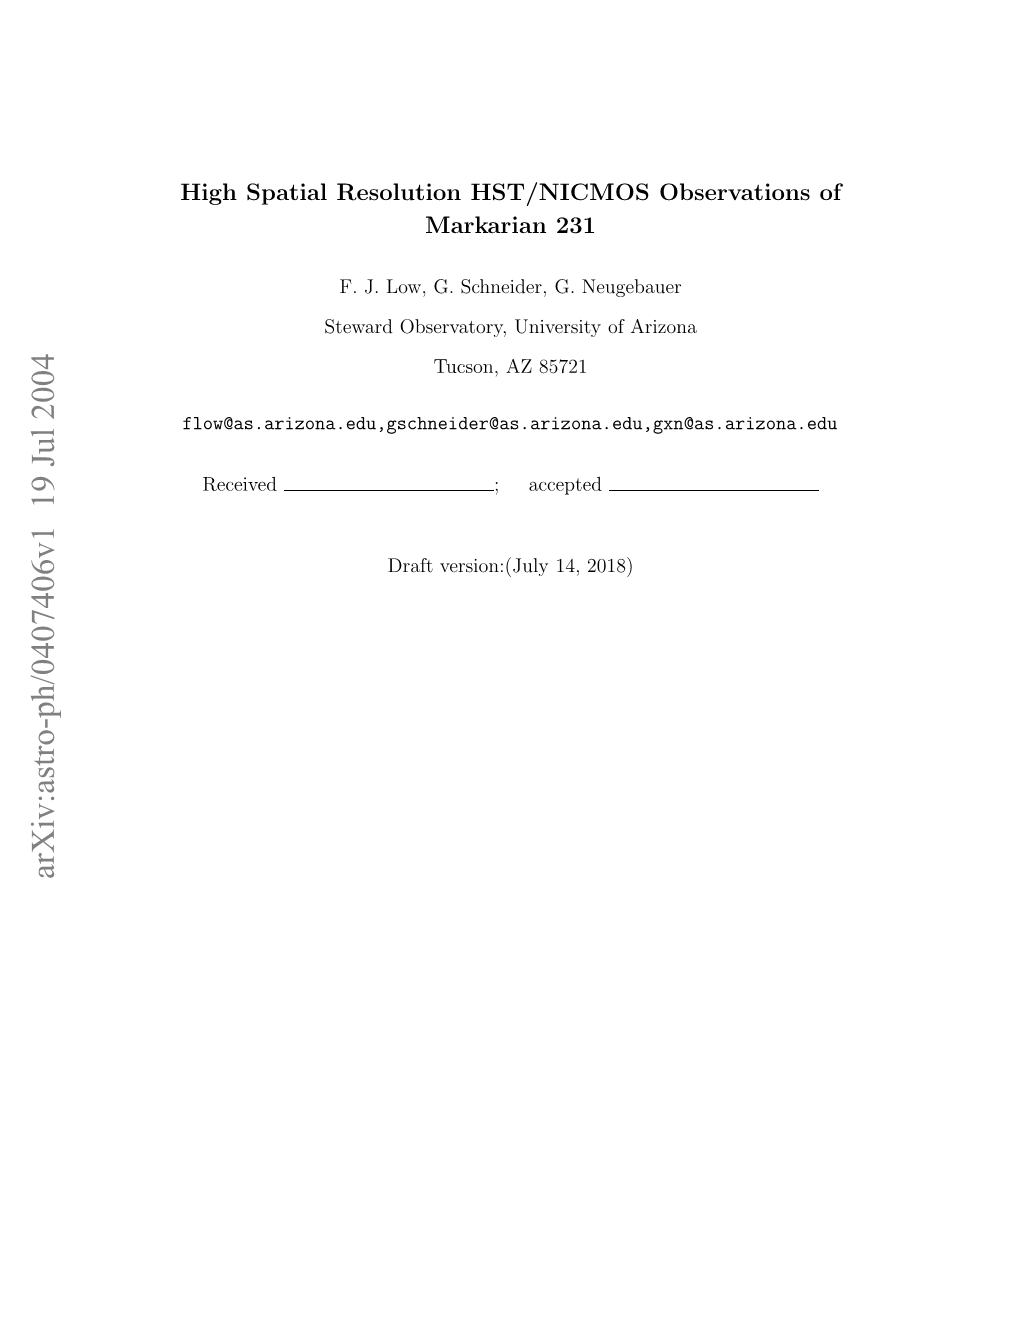 High Spatial Resolution HST/NICMOS Observations Of